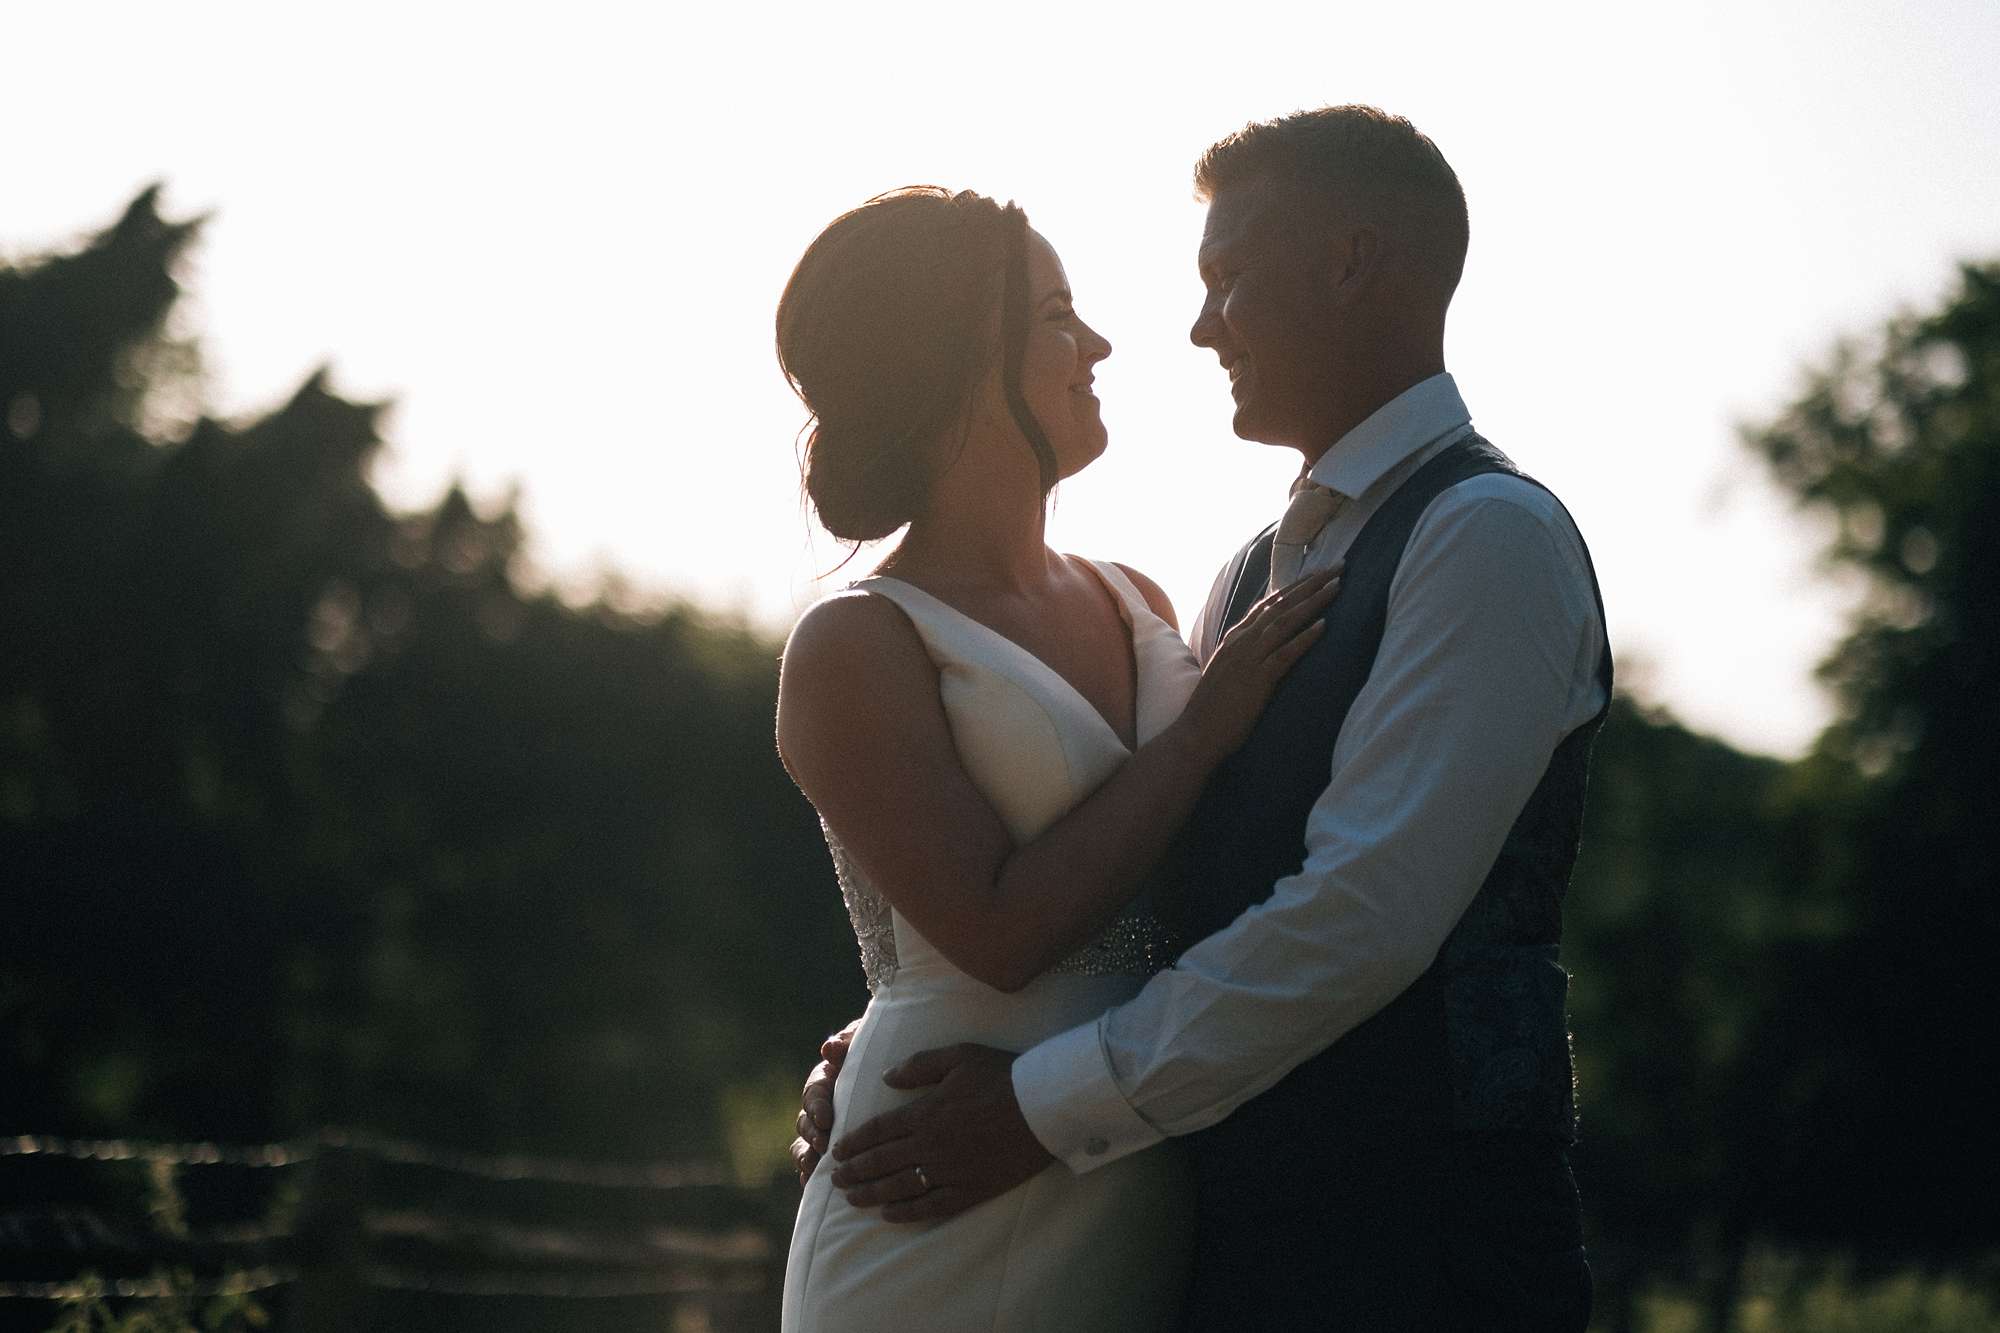 Hot and Sunny wedding at Buxted Park Hotel